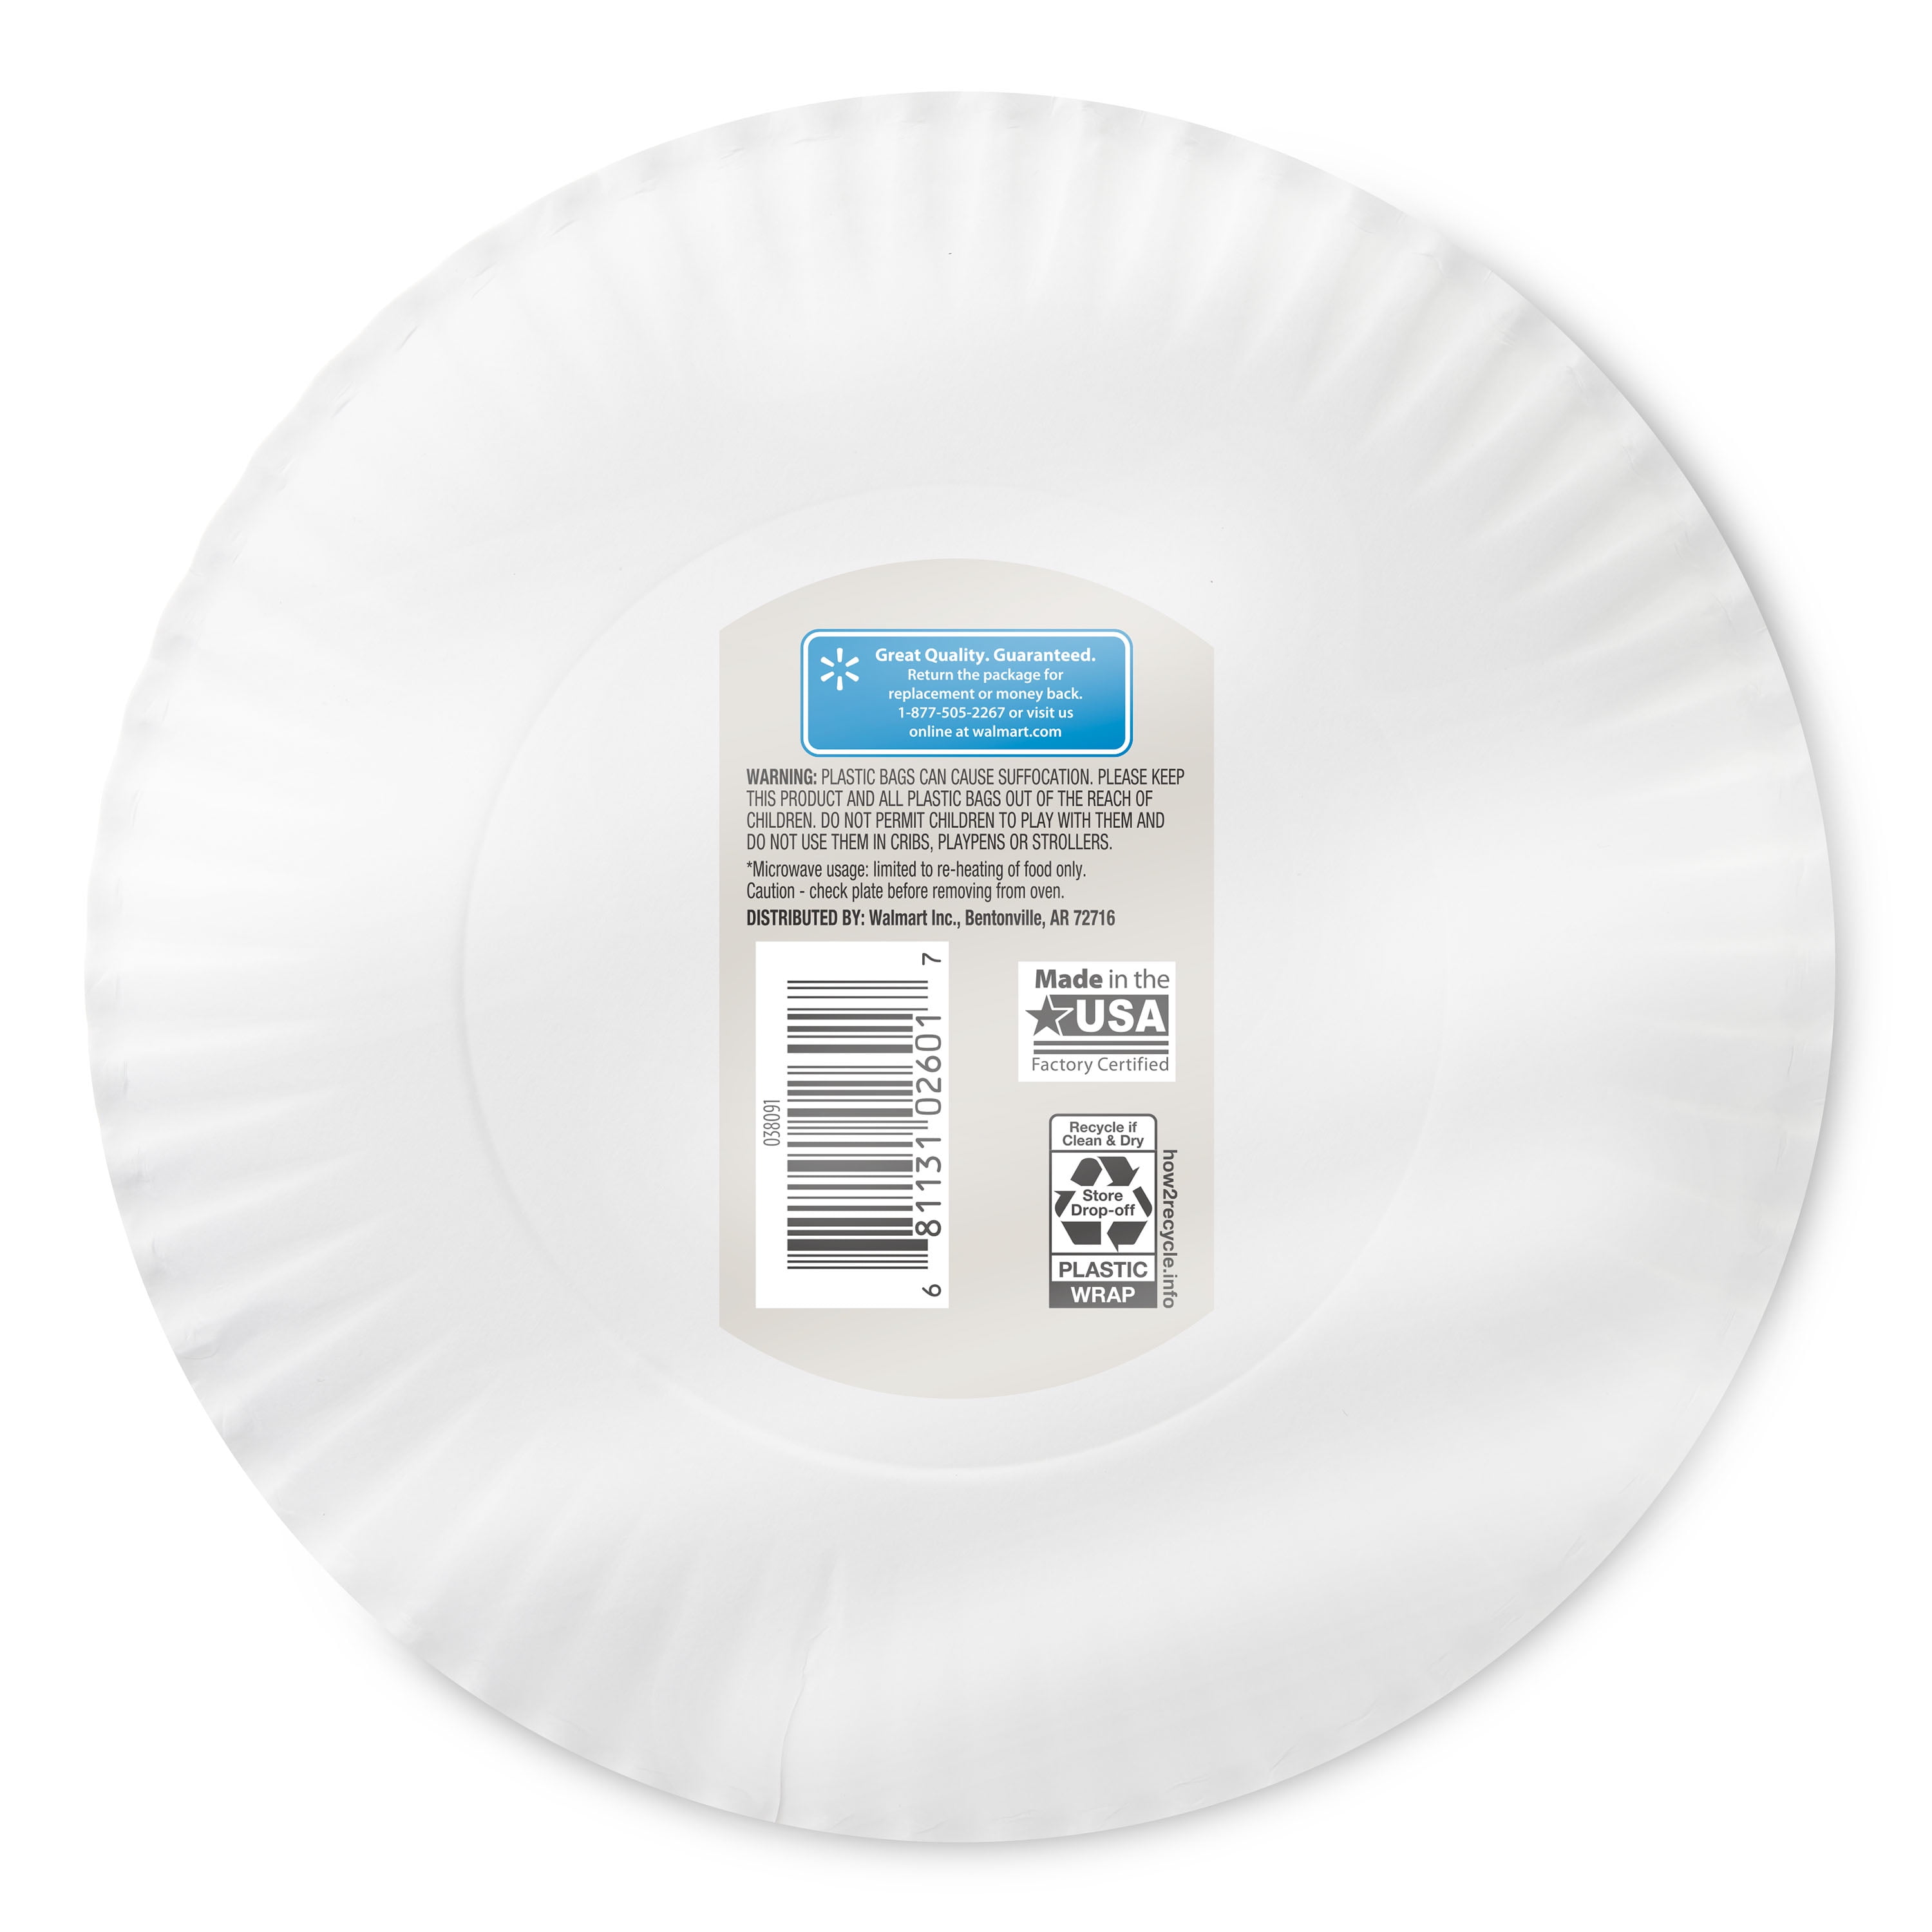 Coated White Paper Plates - Best Yet Brand